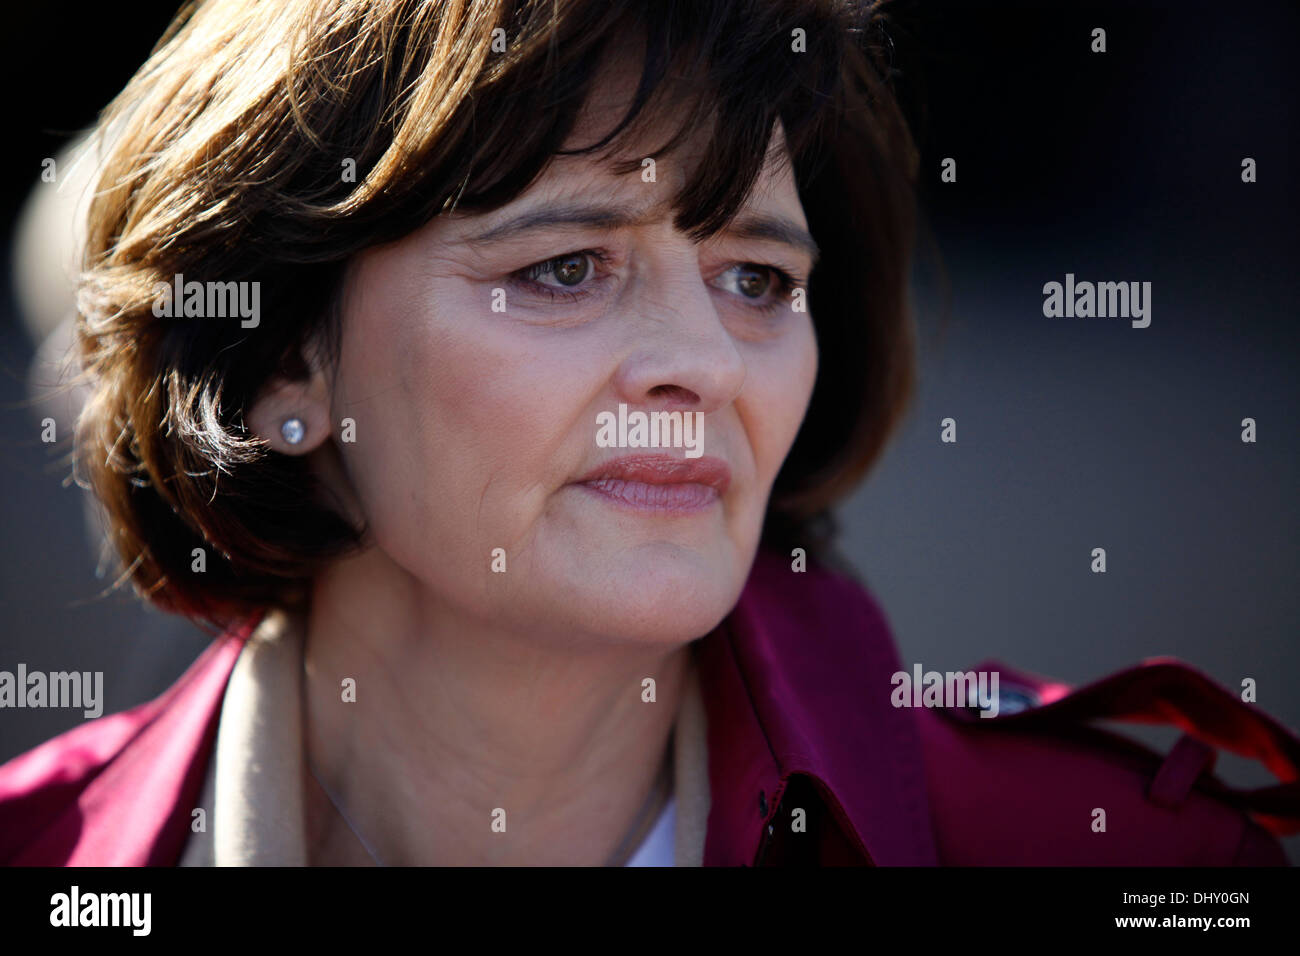 Cherie Blair Is seen during a photos call to promote annual event which sees women around the world calling for an end to violen Stock Photo